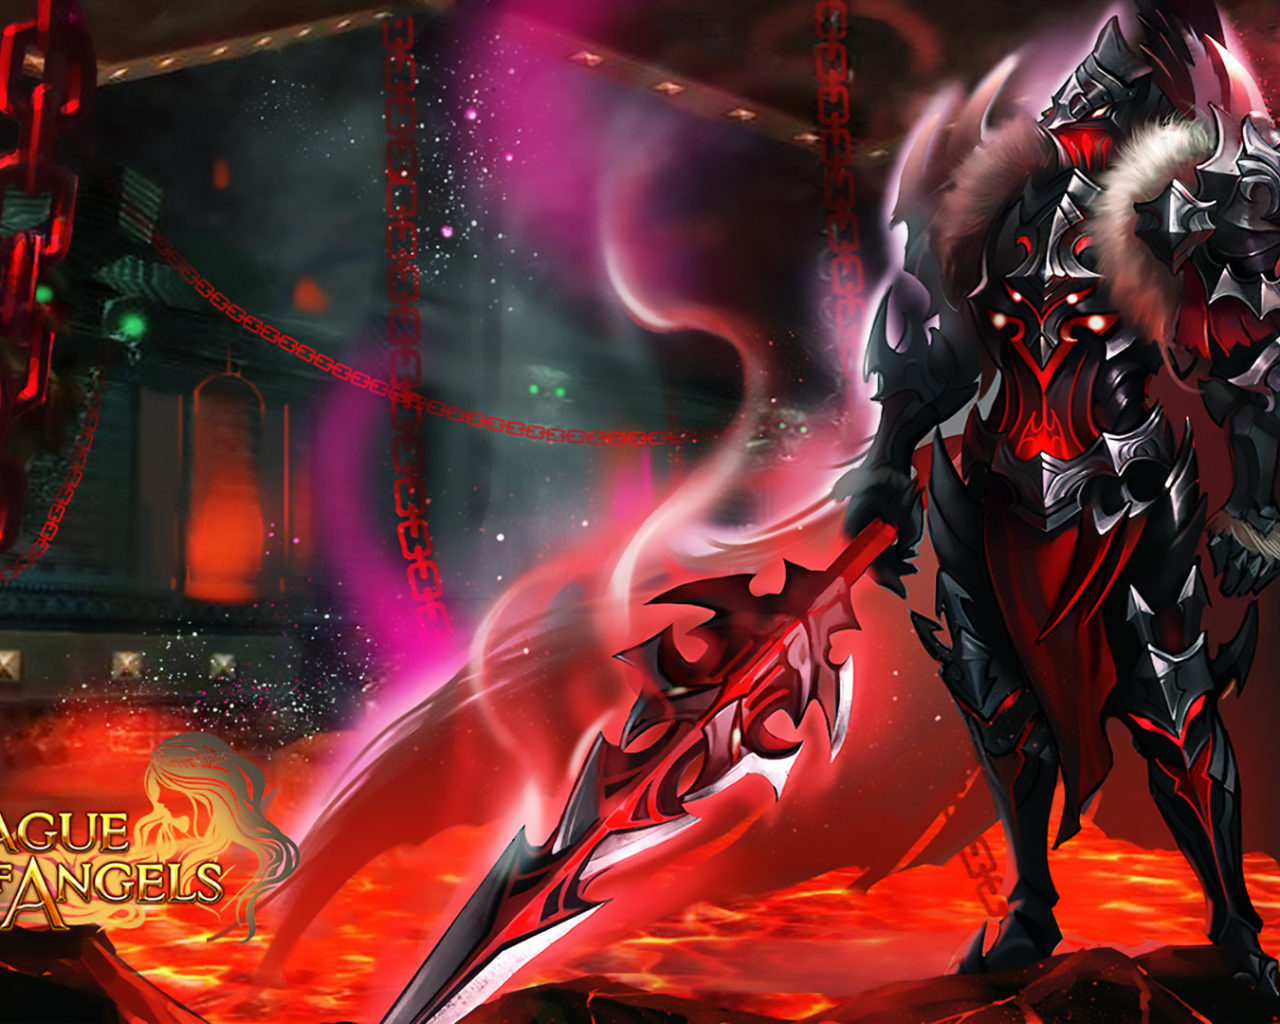 Dark Paladin Mysterious Warrior Armed With Sword Magical Armor League Of Angels Video Game Artwork Wallpaper HD 1920x1080, Wallpaper13.com